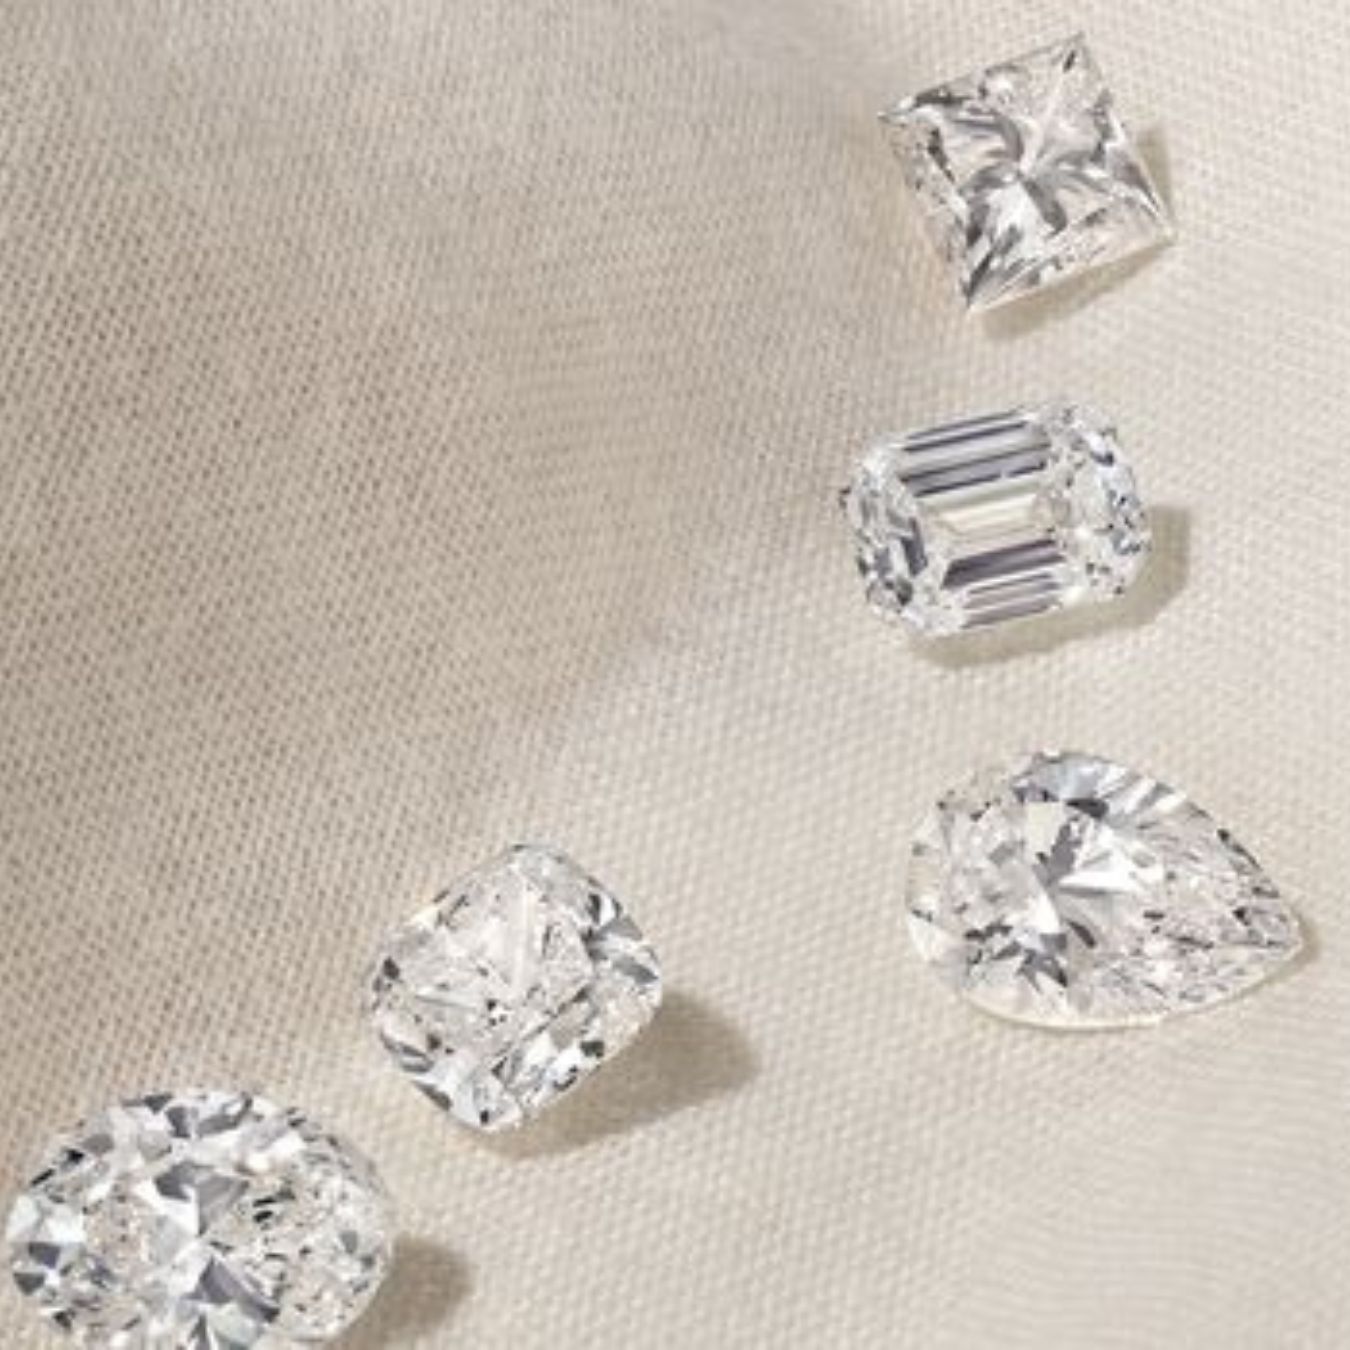 What is a lab-Grown diamond?